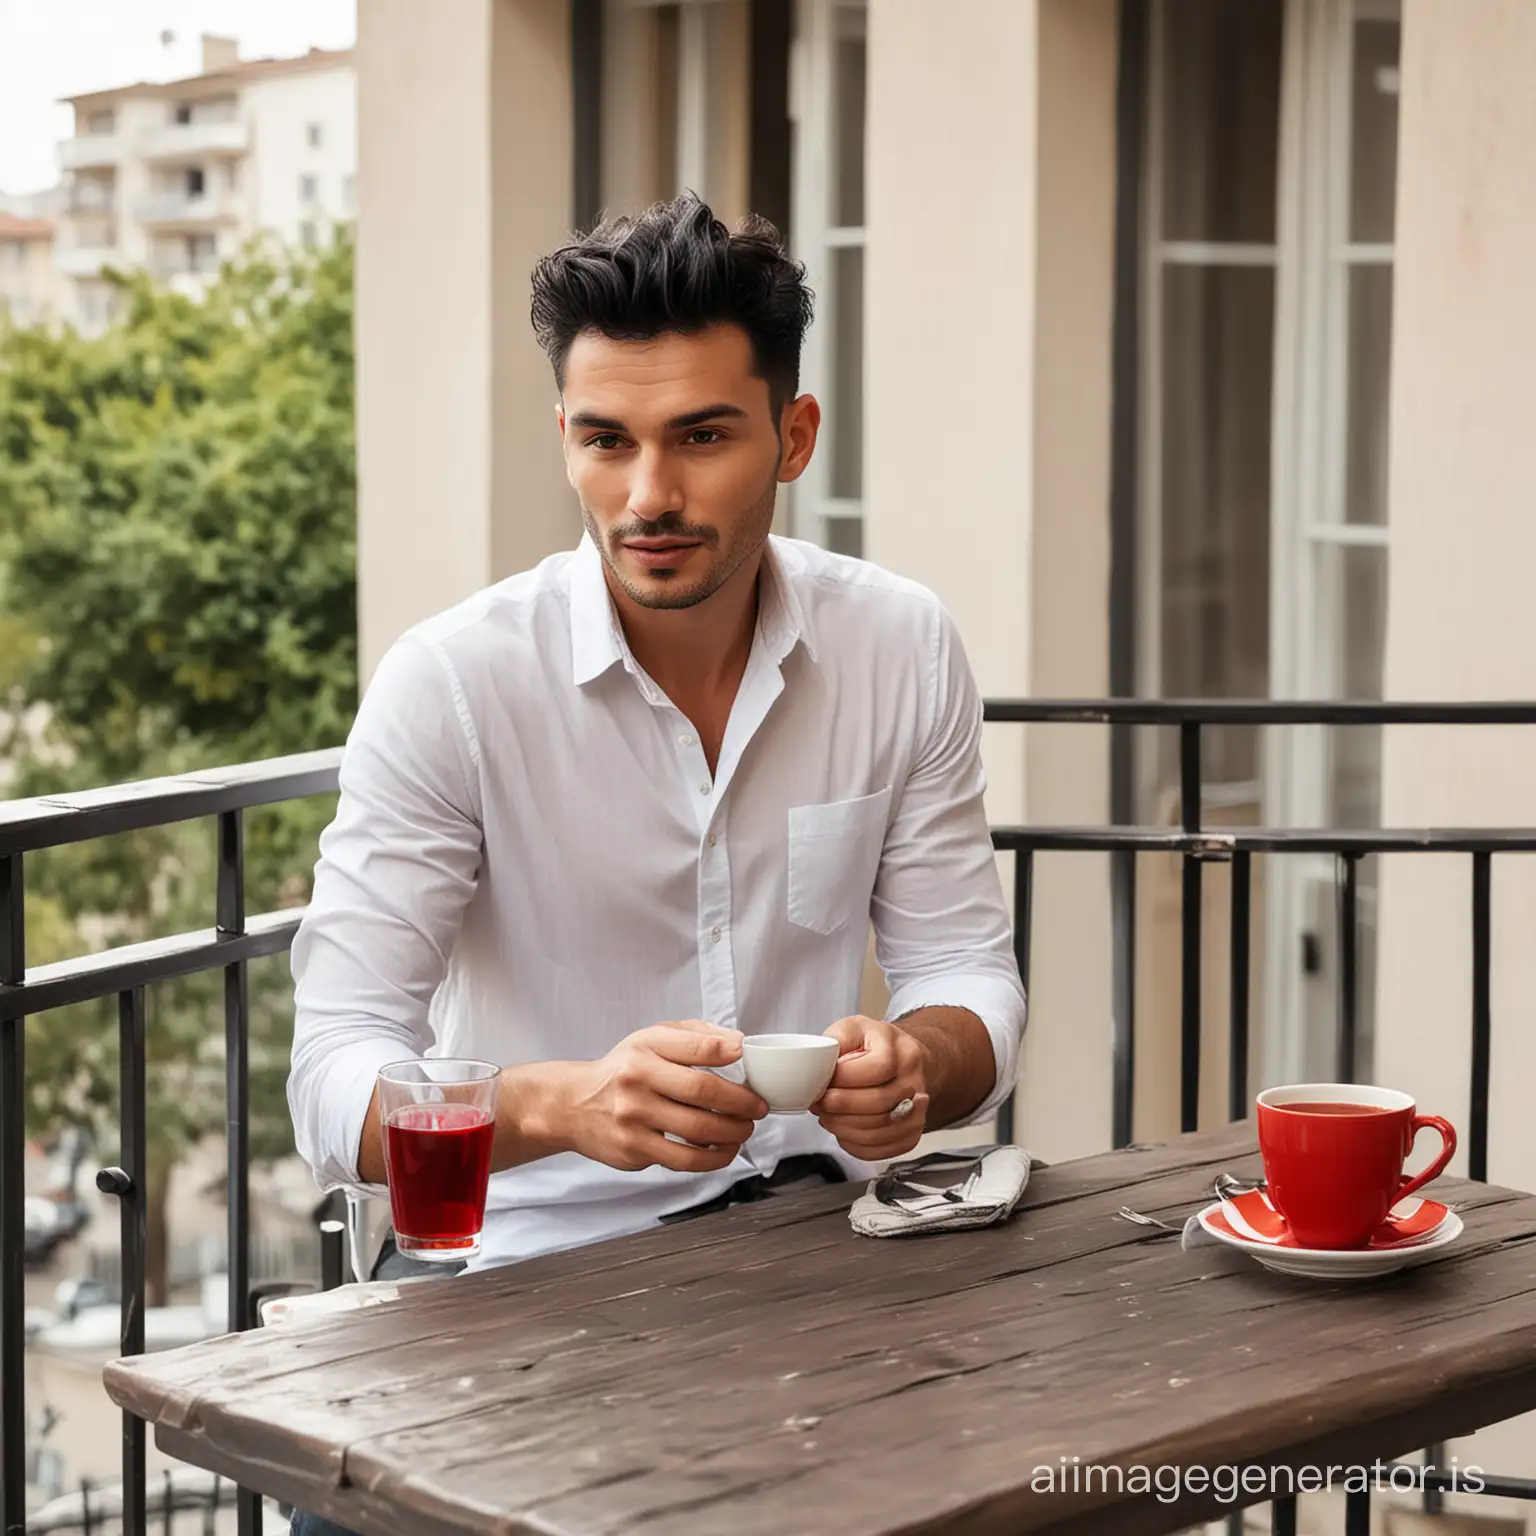 Stylish man with casual clothes and regular black hairs in balcony and one cup of red tea on the table